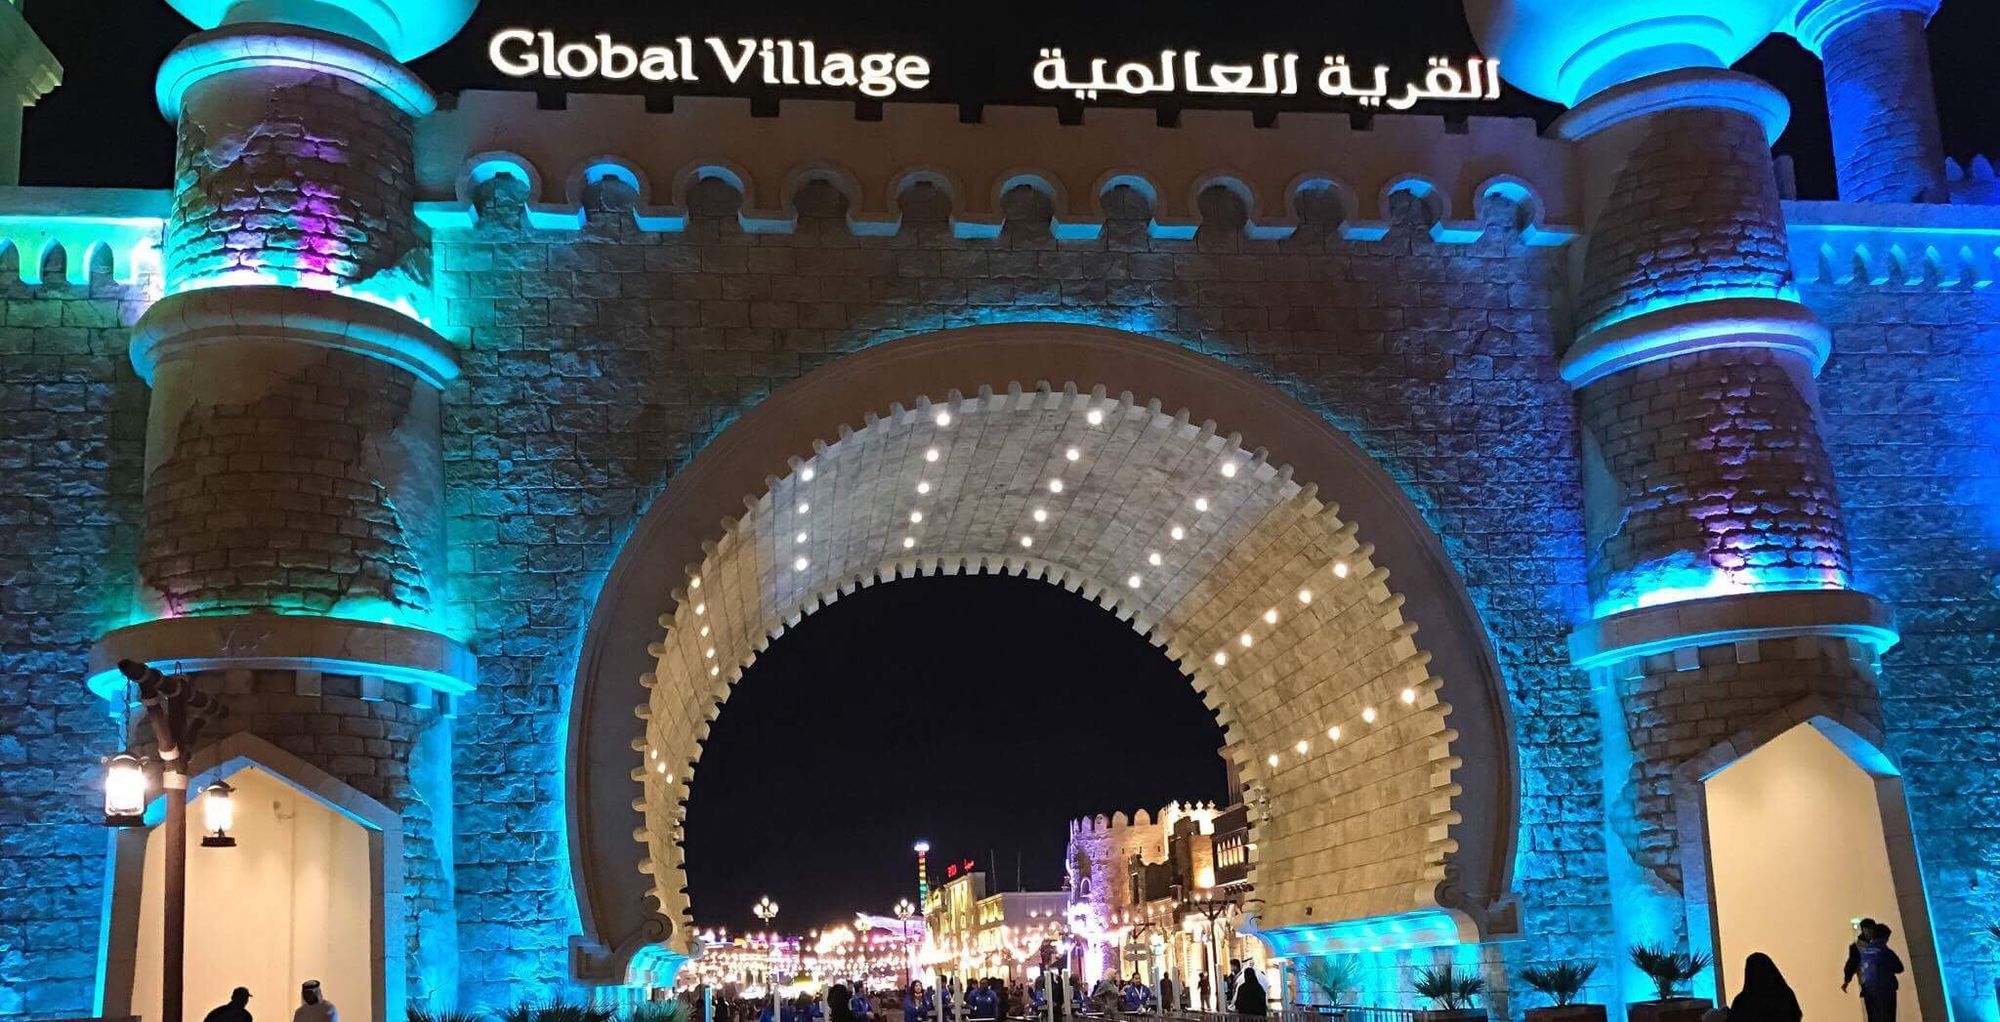 5 Things We Love About The Kids Fest At Global Village In Dubai!